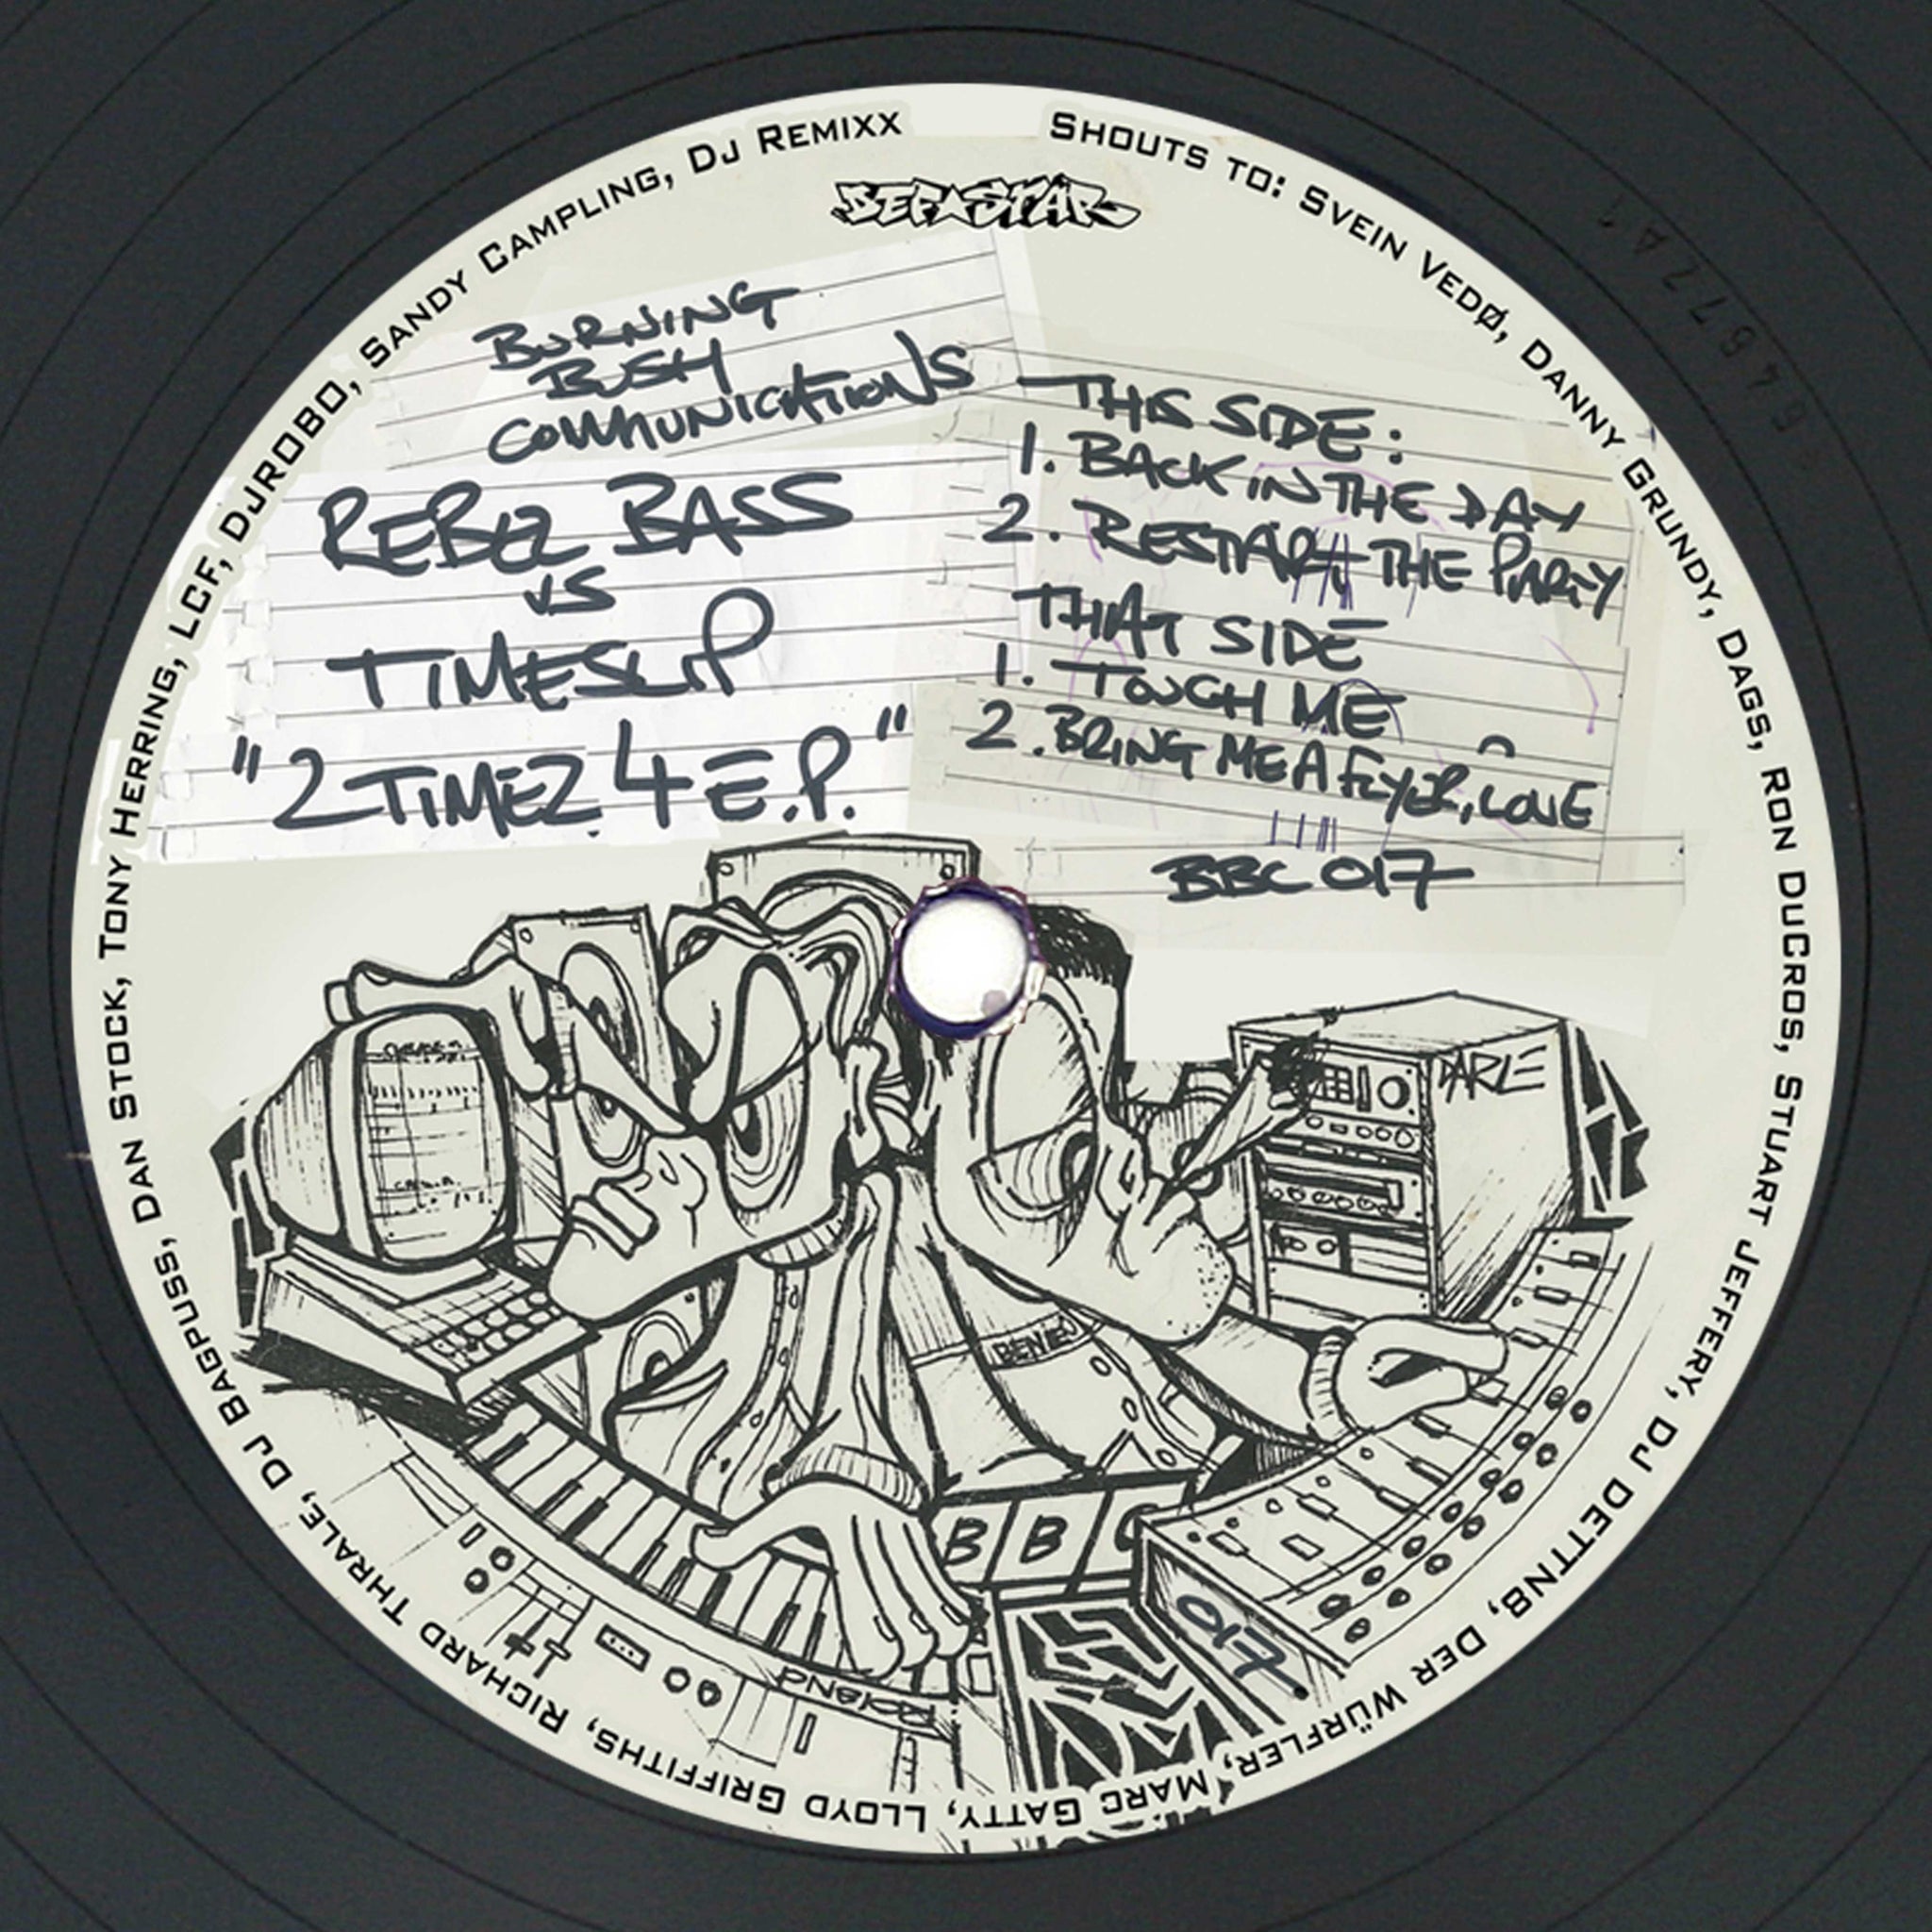 Rebel Bass vs Timeslip - 2 Timez 4 EP - Out Of Joint Records